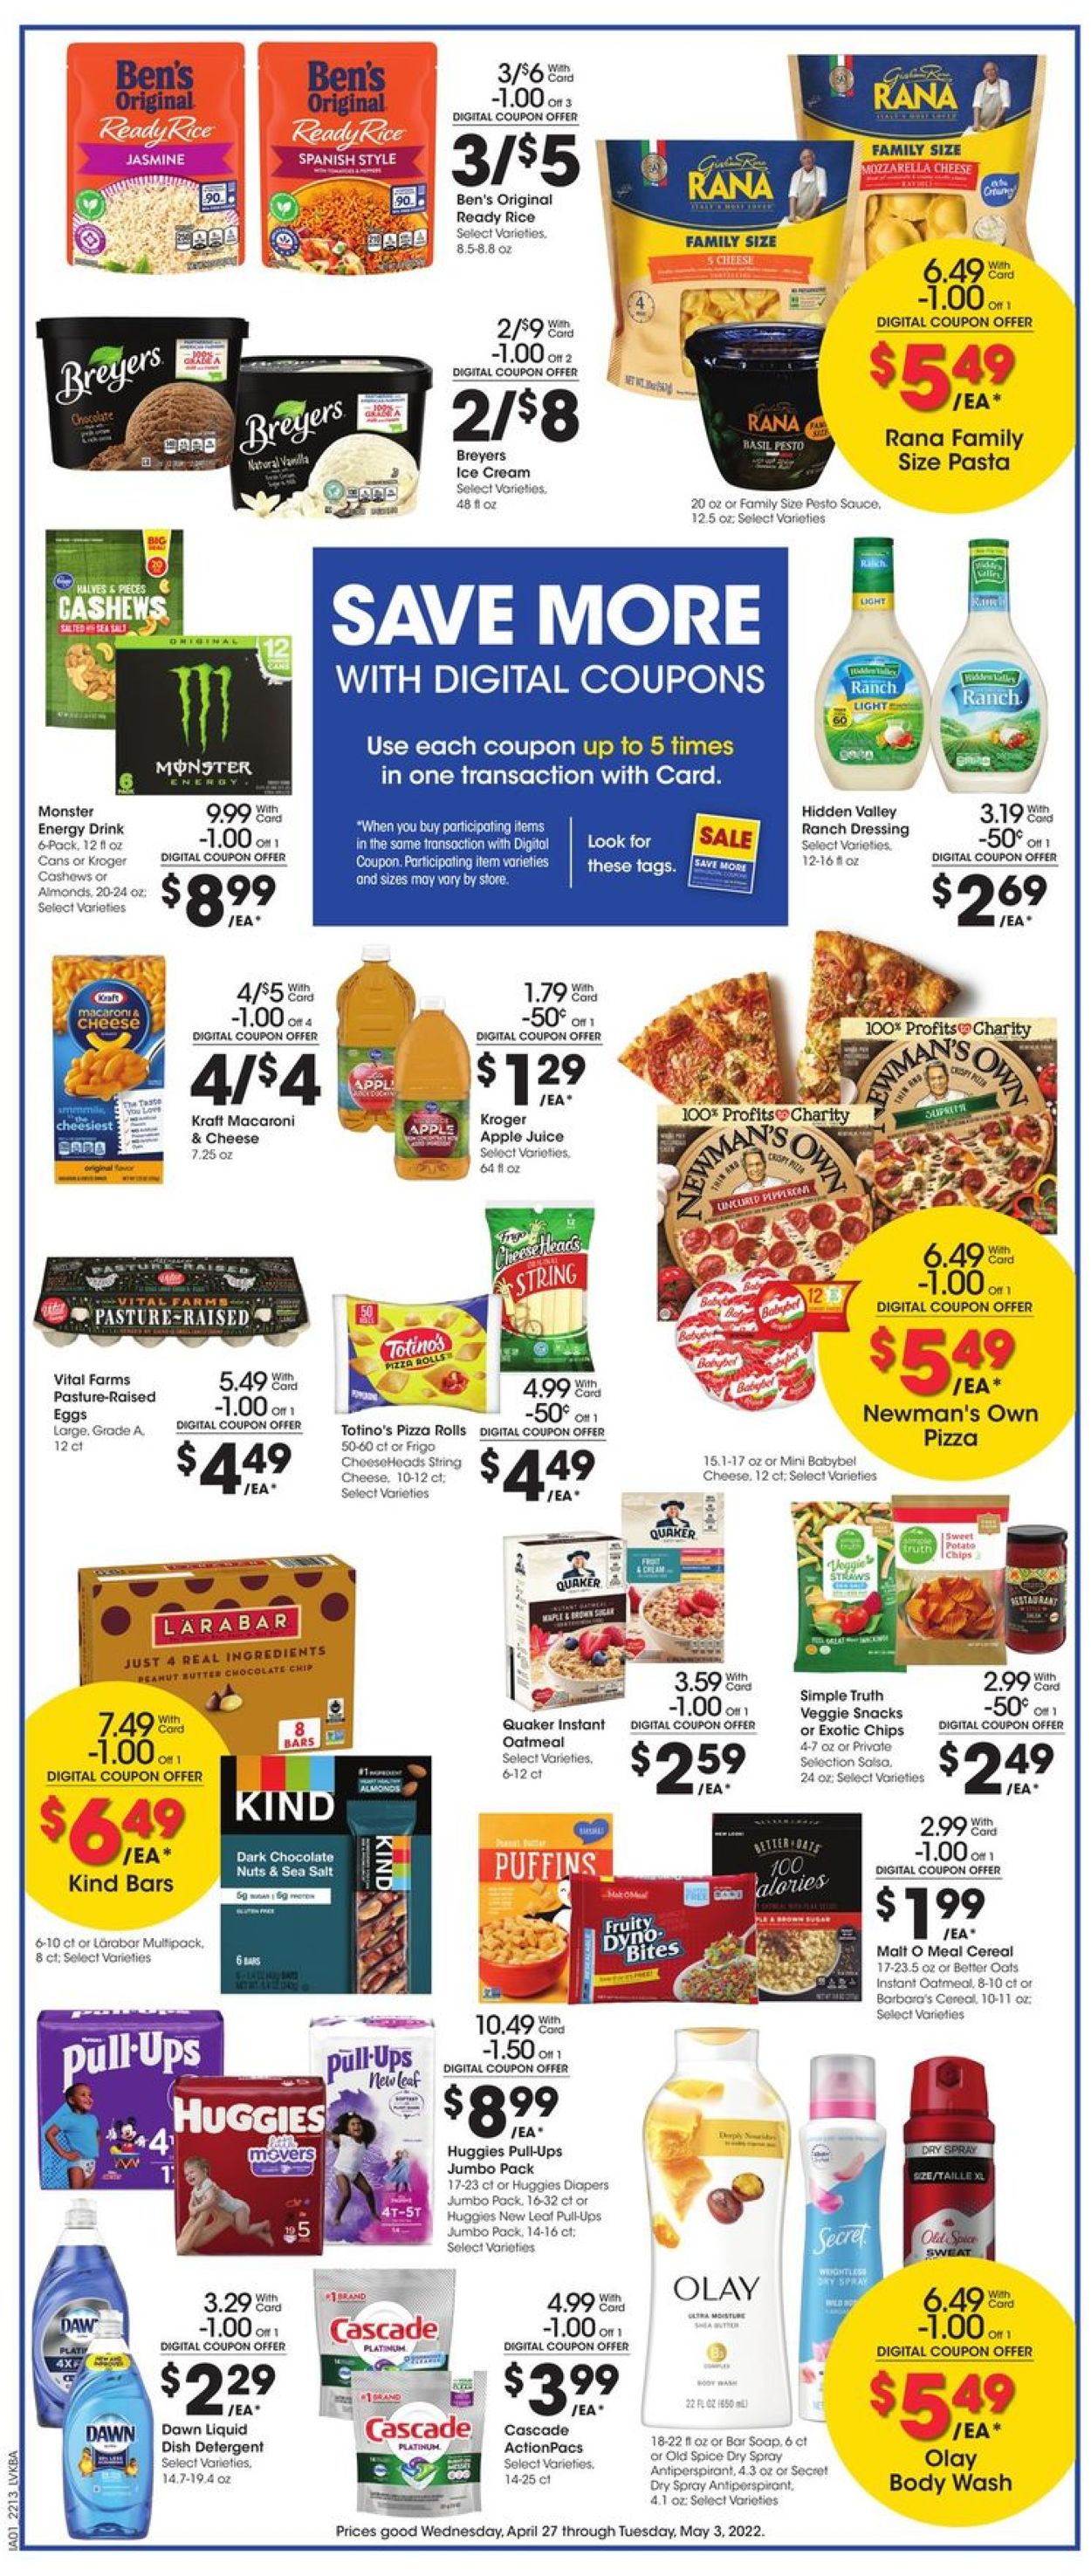 Catalogue Jay C Food Stores from 04/27/2022